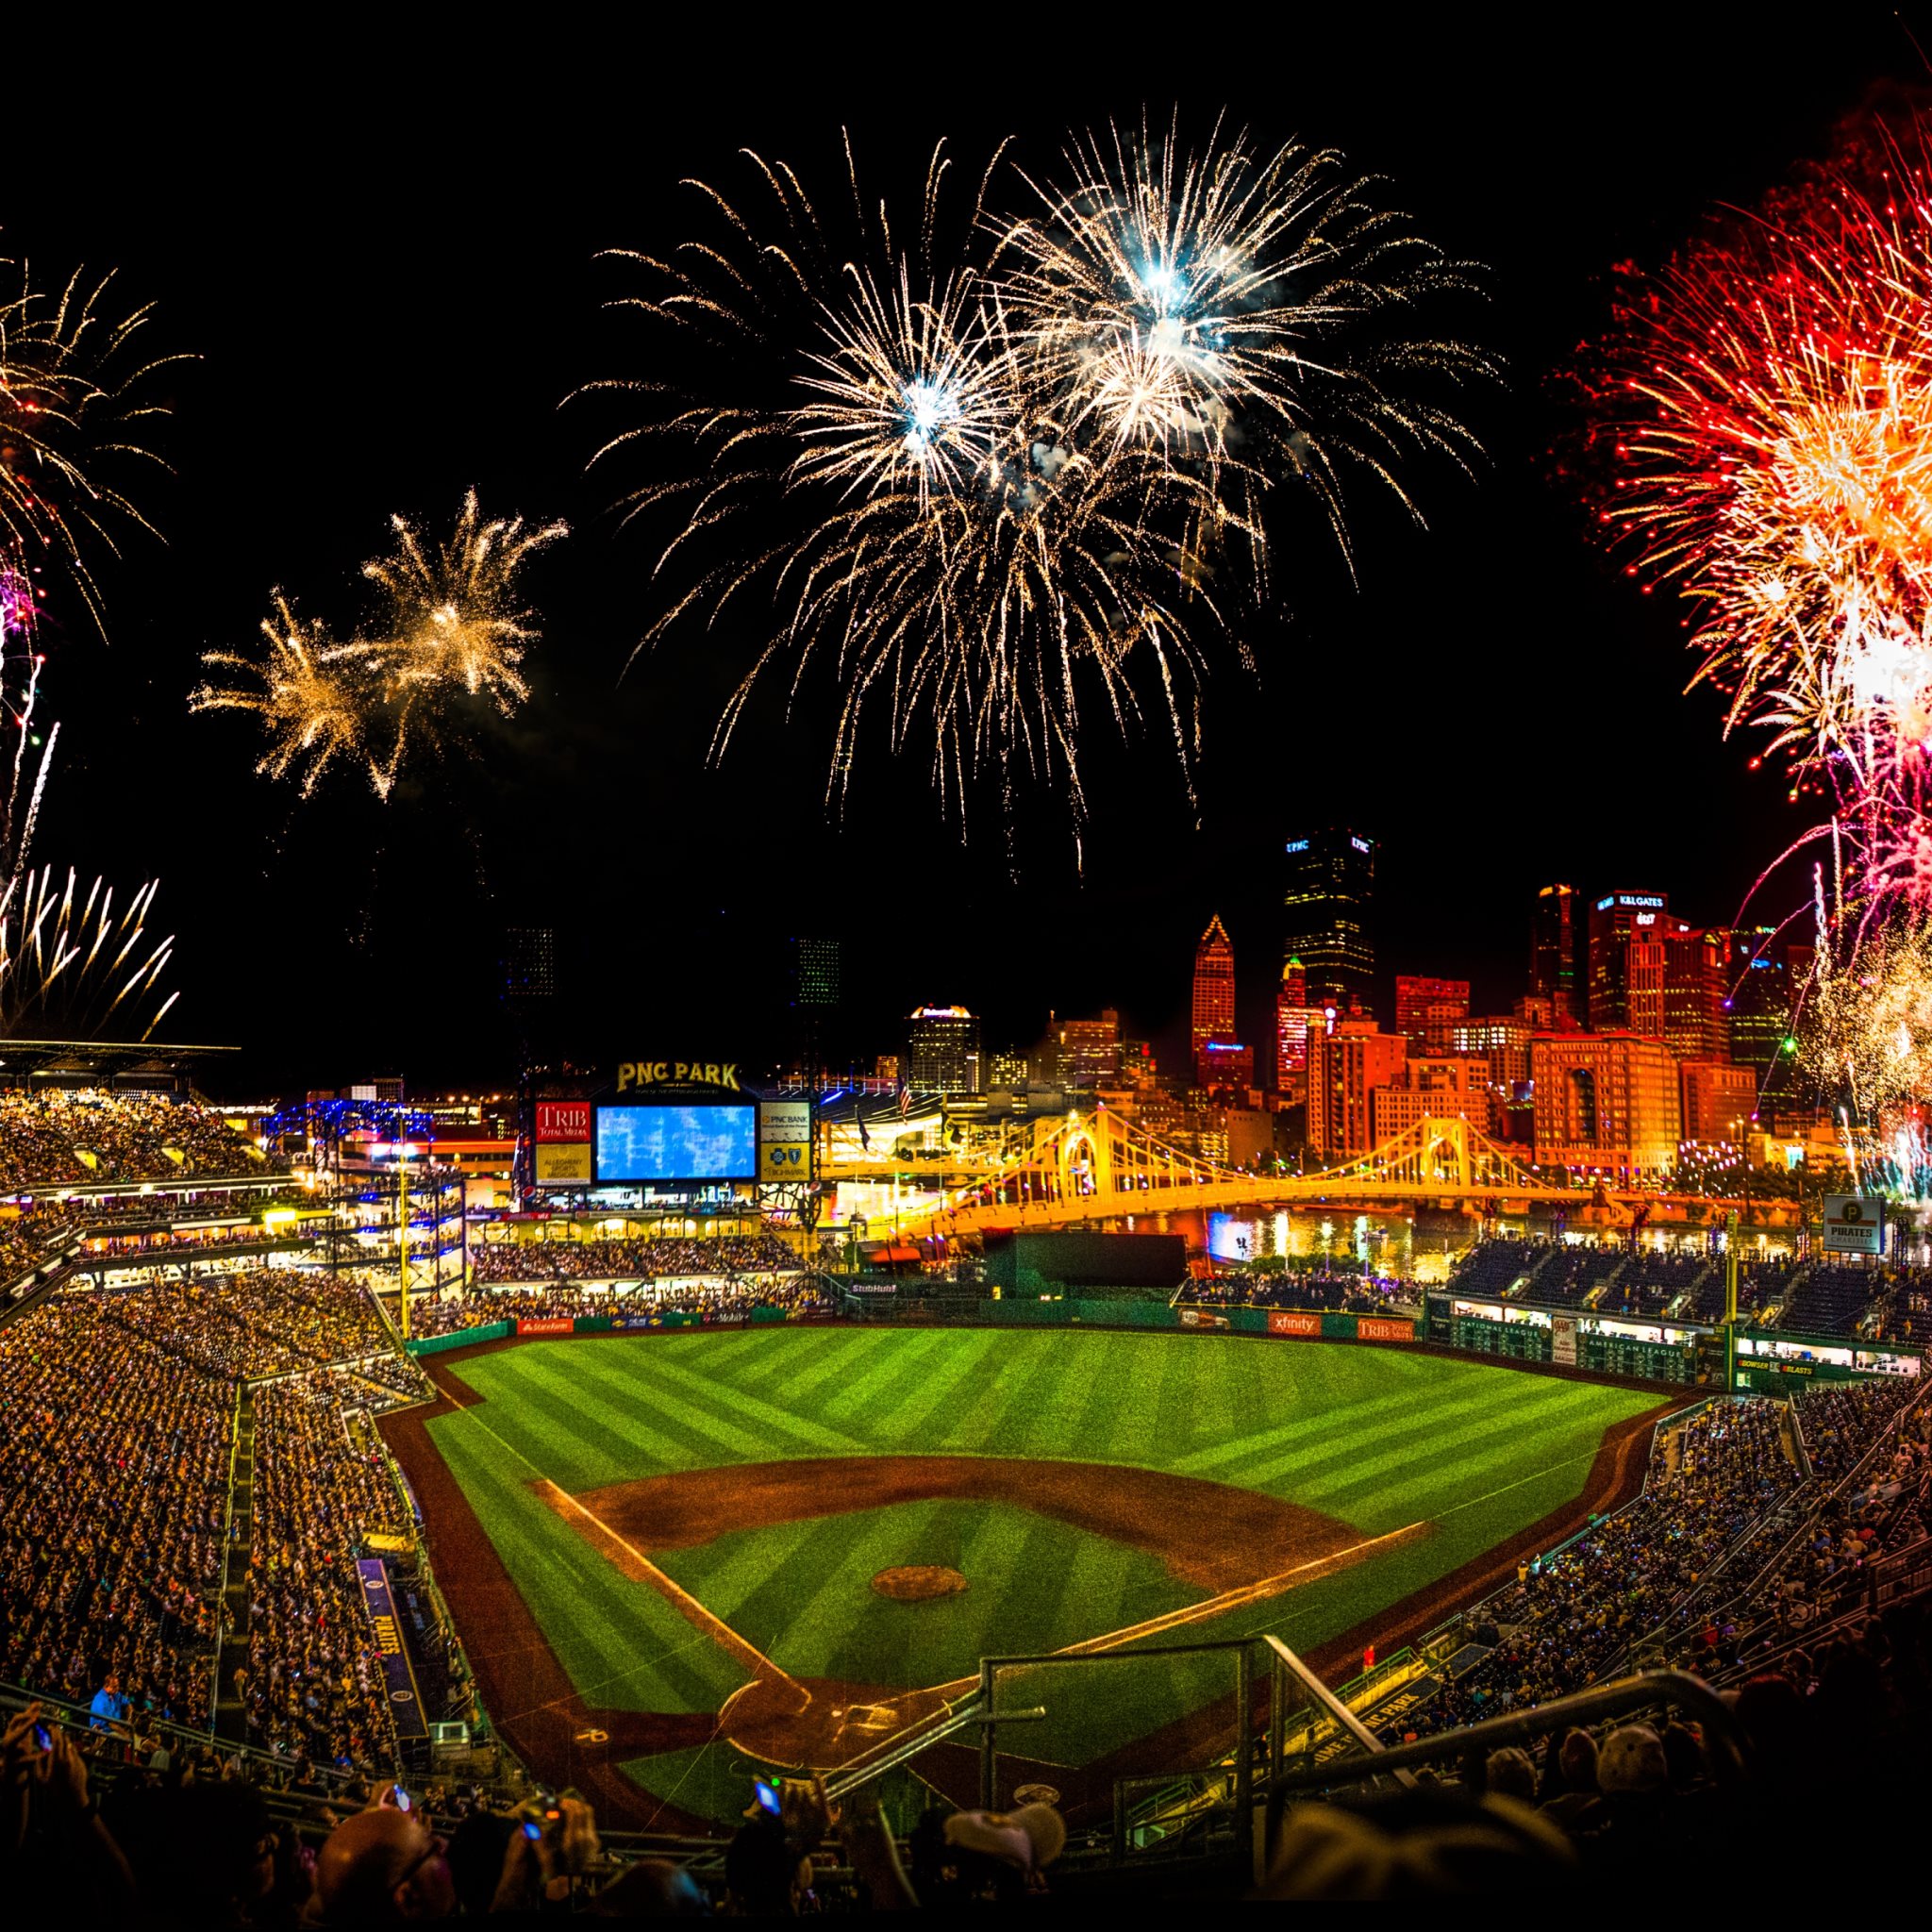 Free Download Pnc Baseball Park Hd Wallpapers 4k Wallpapers 48x48 For Your Desktop Mobile Tablet Explore 26 Pnc Park Wallpaper 19x1080 Giants Baseball Wallpaper Pittsburgh Scenes Wallpaper For Desktop